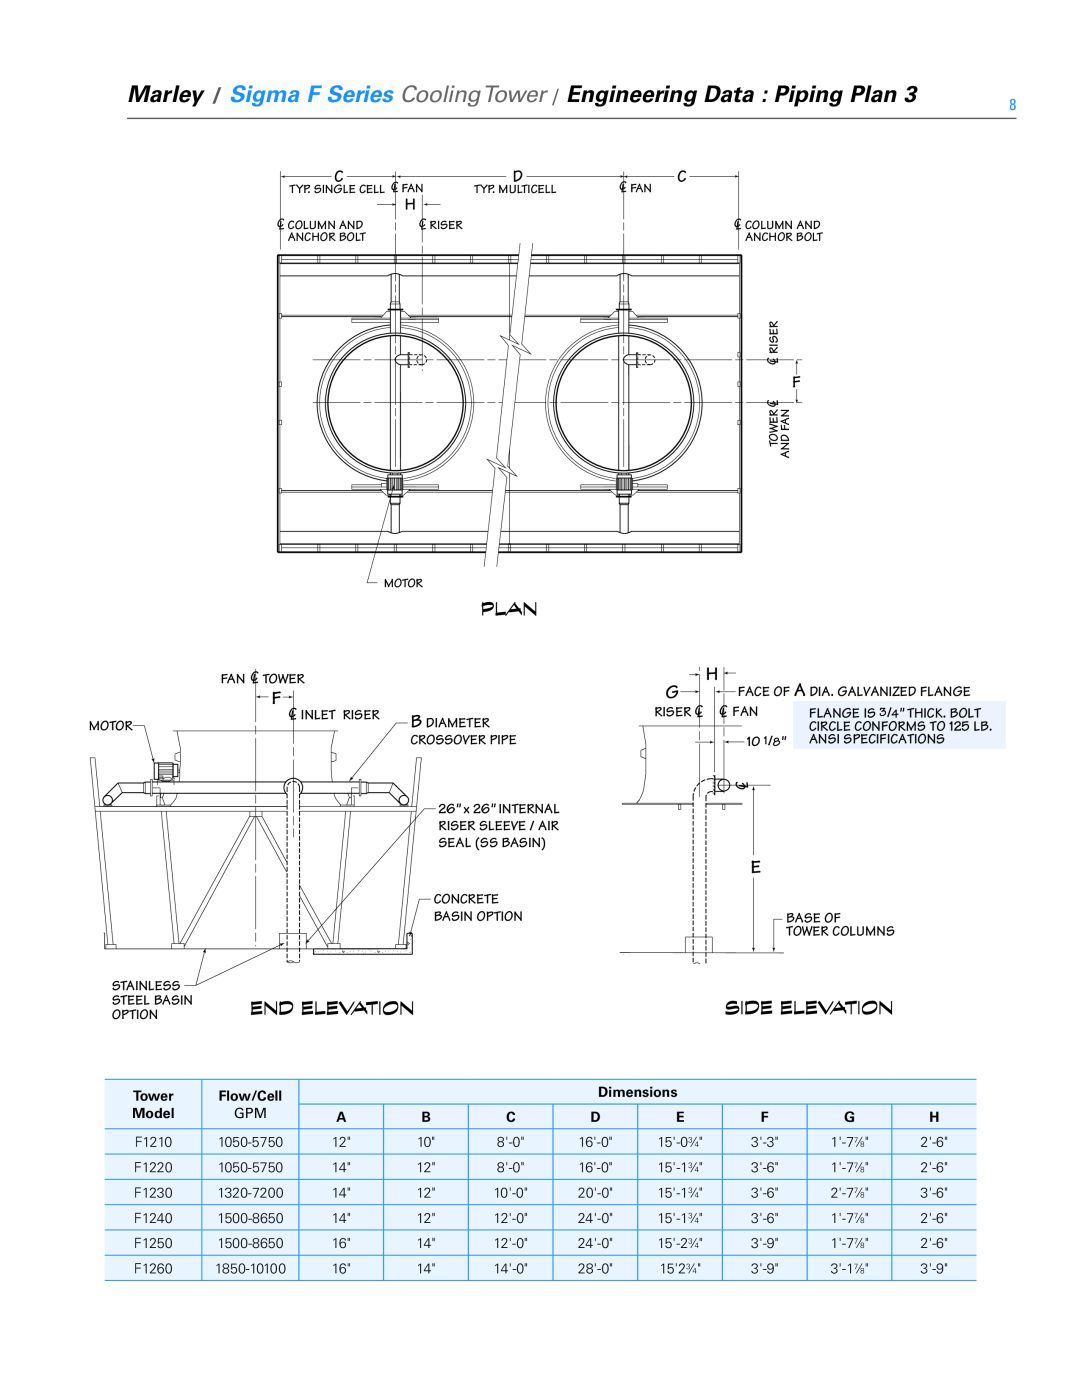 SPX Cooling Technologies FSIG-TS-08A specifications STEEL BASIN End Elevation, Side Elevation, Plan 